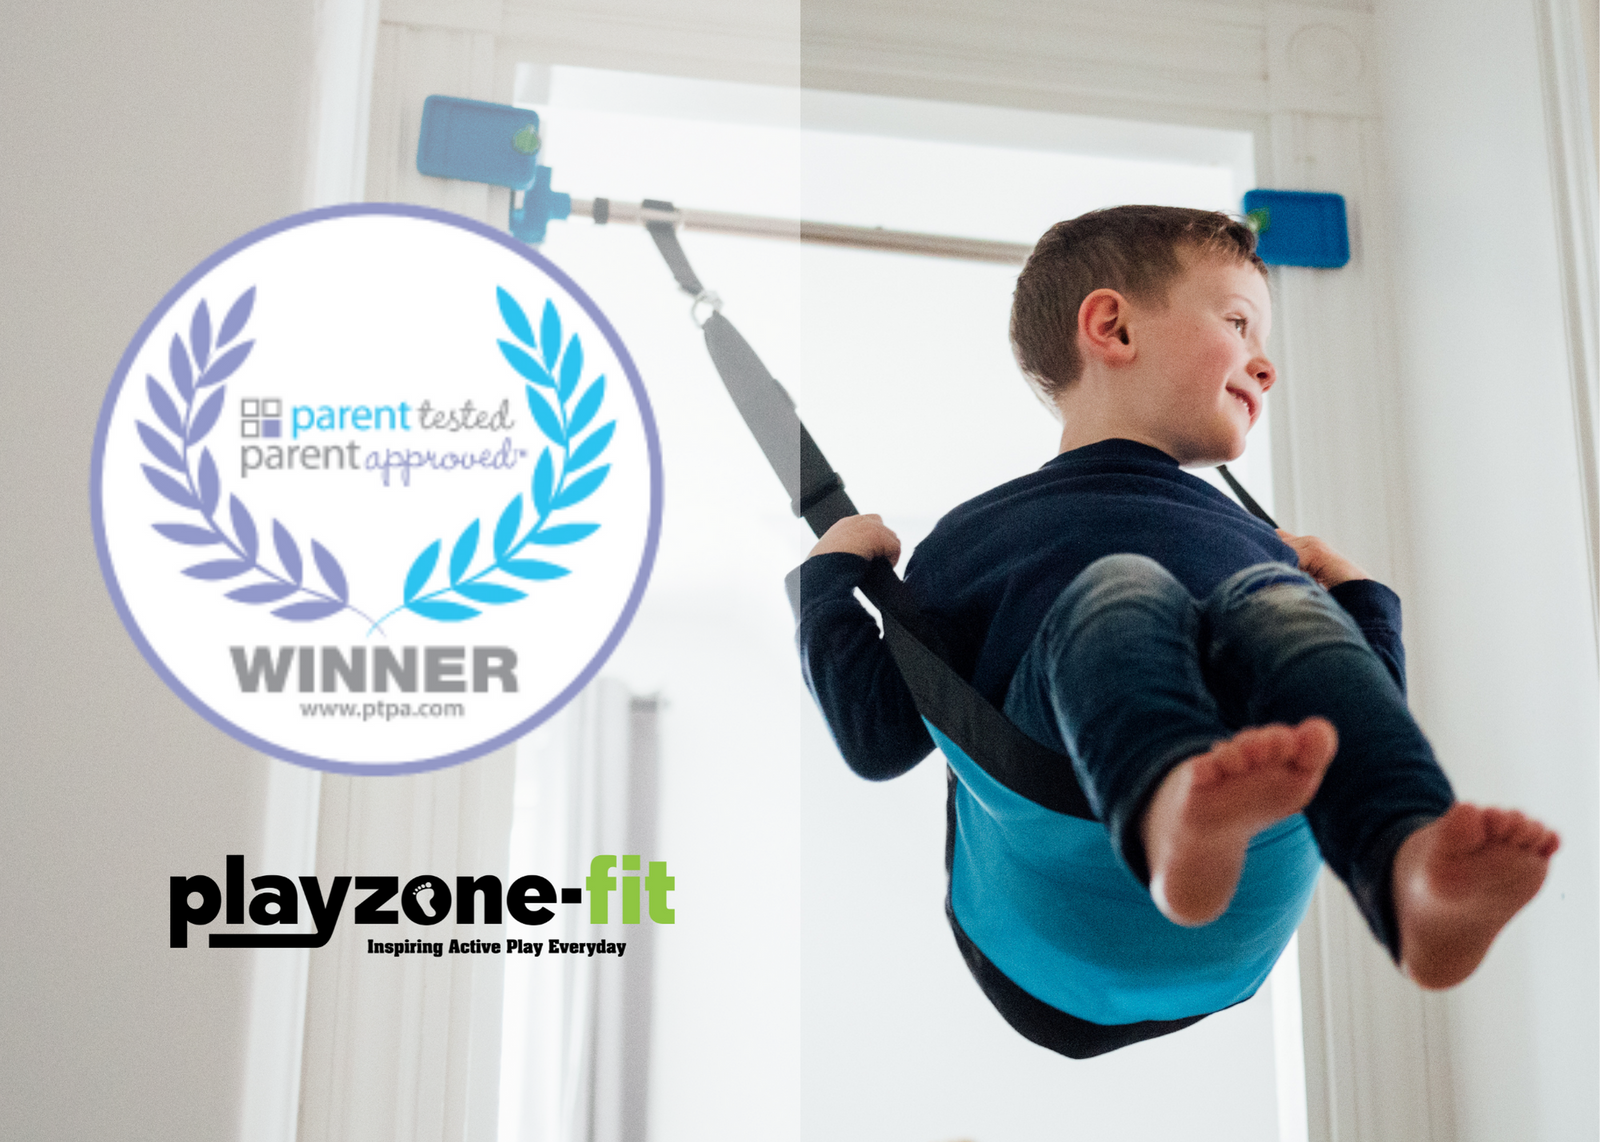 Playzone-fit Kidtrix Wins Parent Tested Parent Approved Seal of Approval 2021